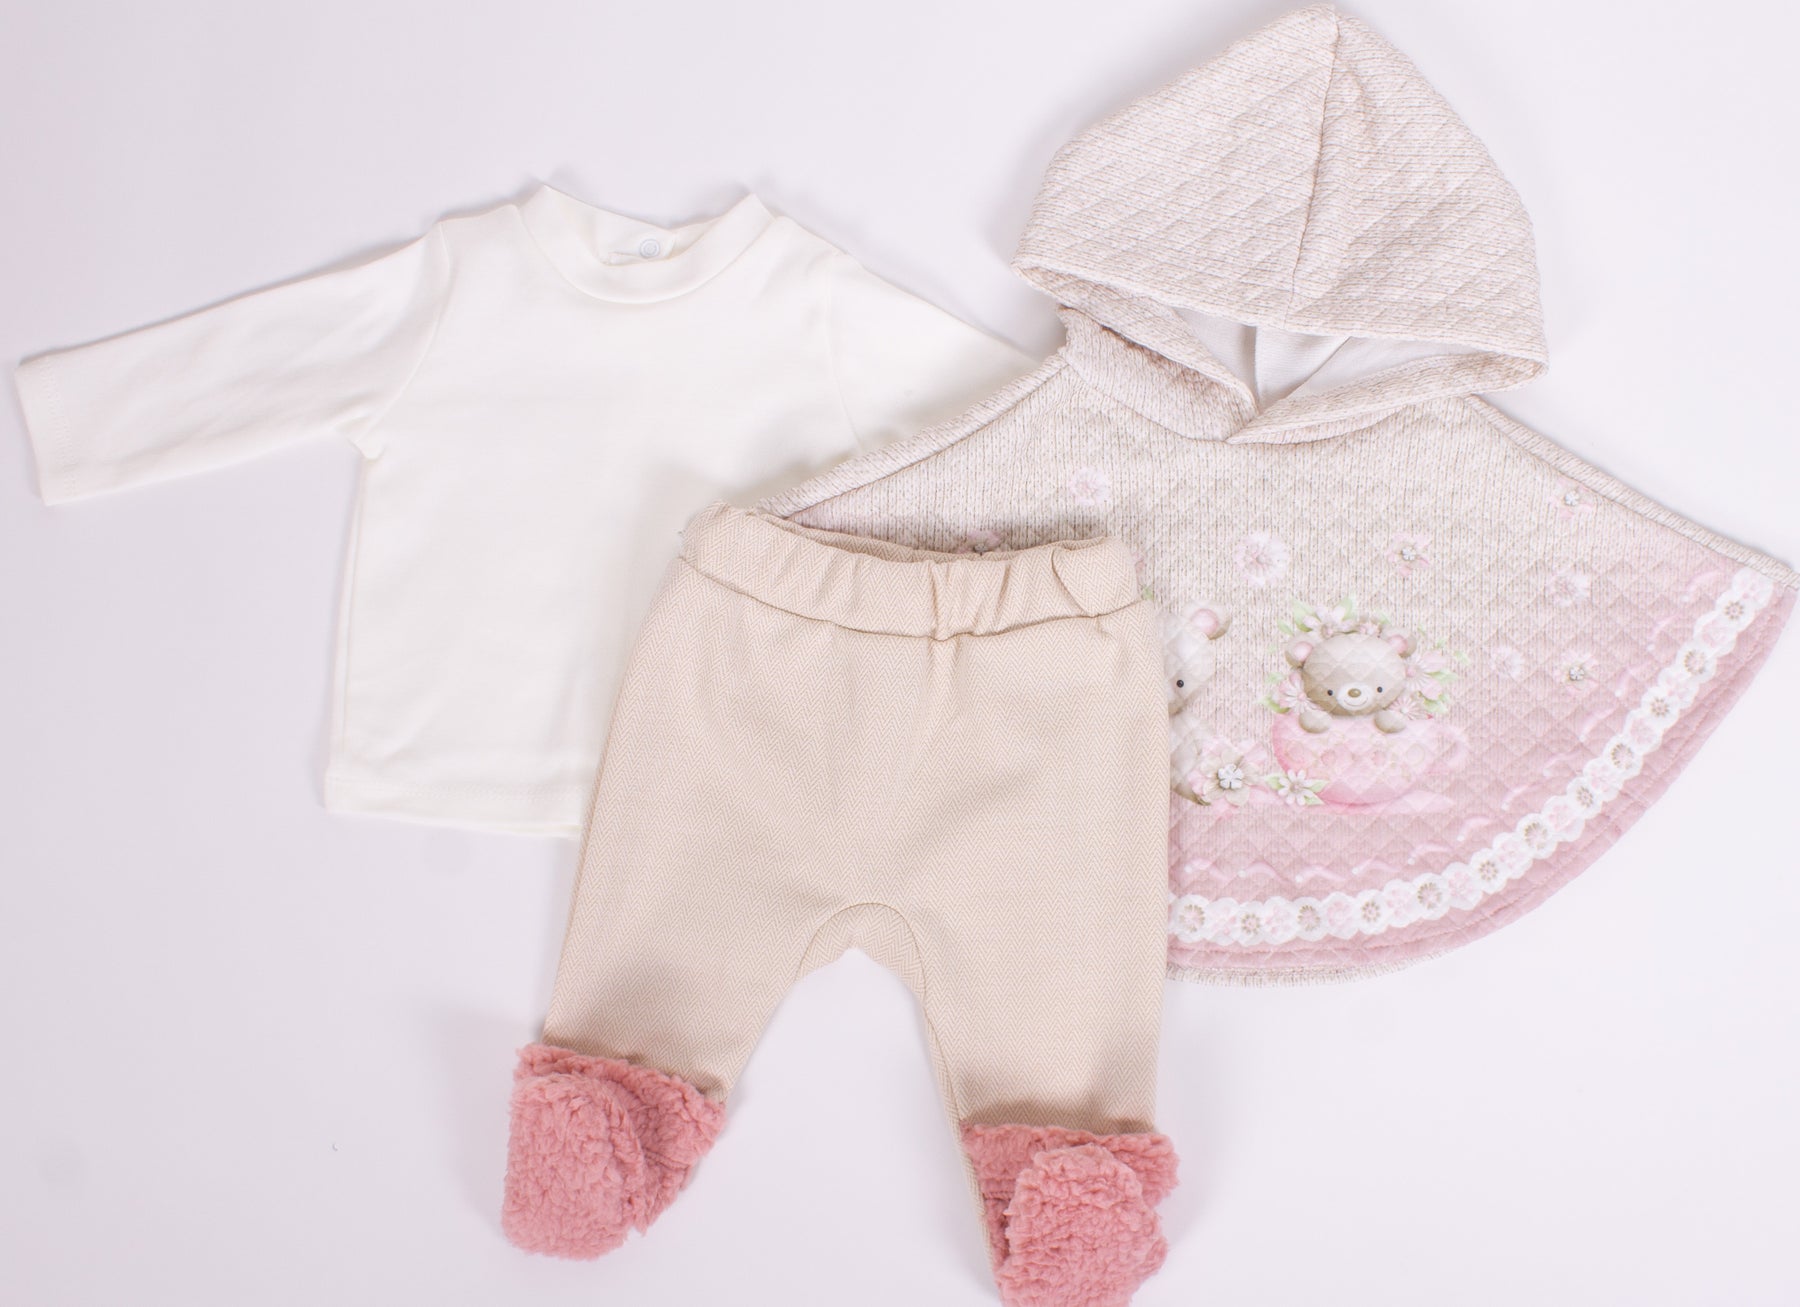 Elma's Clothing offers the best baby and children's products.